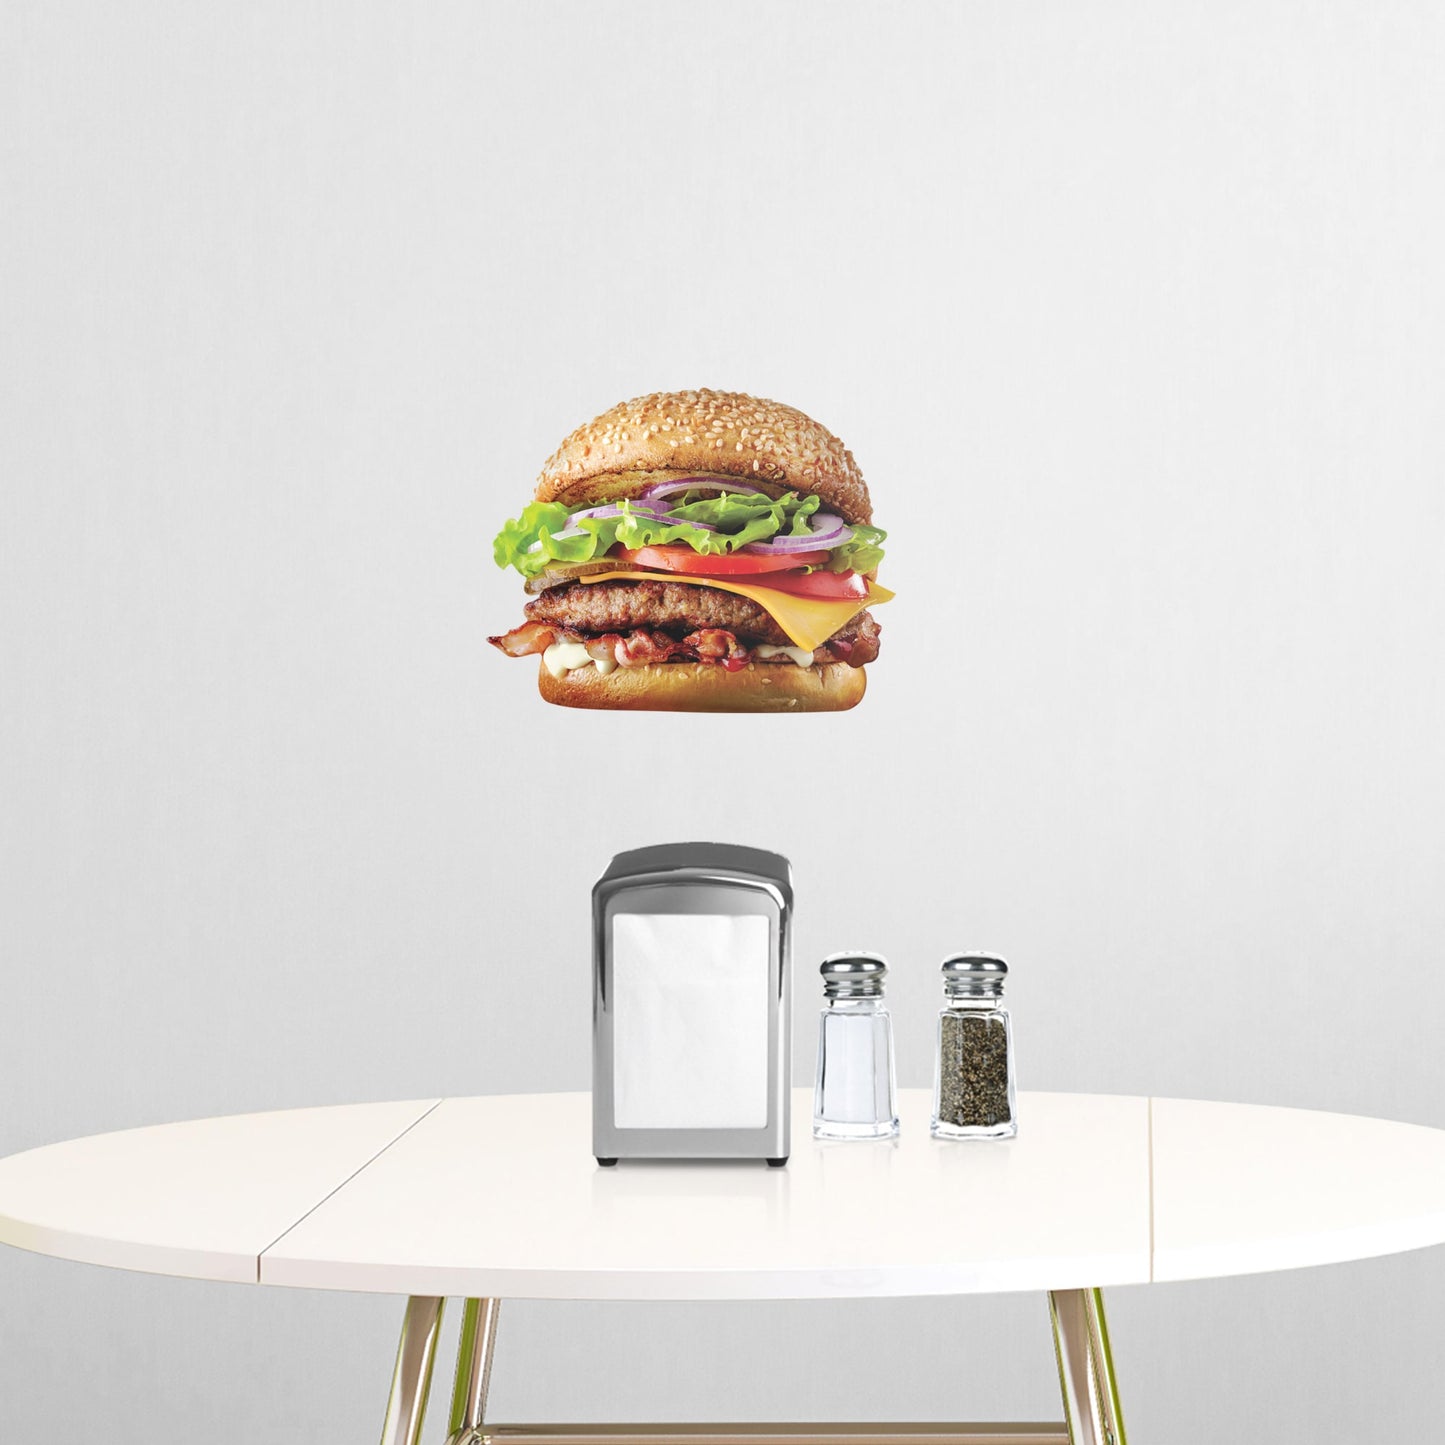 Giant Cheeseburger + 2 Decals (40"W x 33"H)